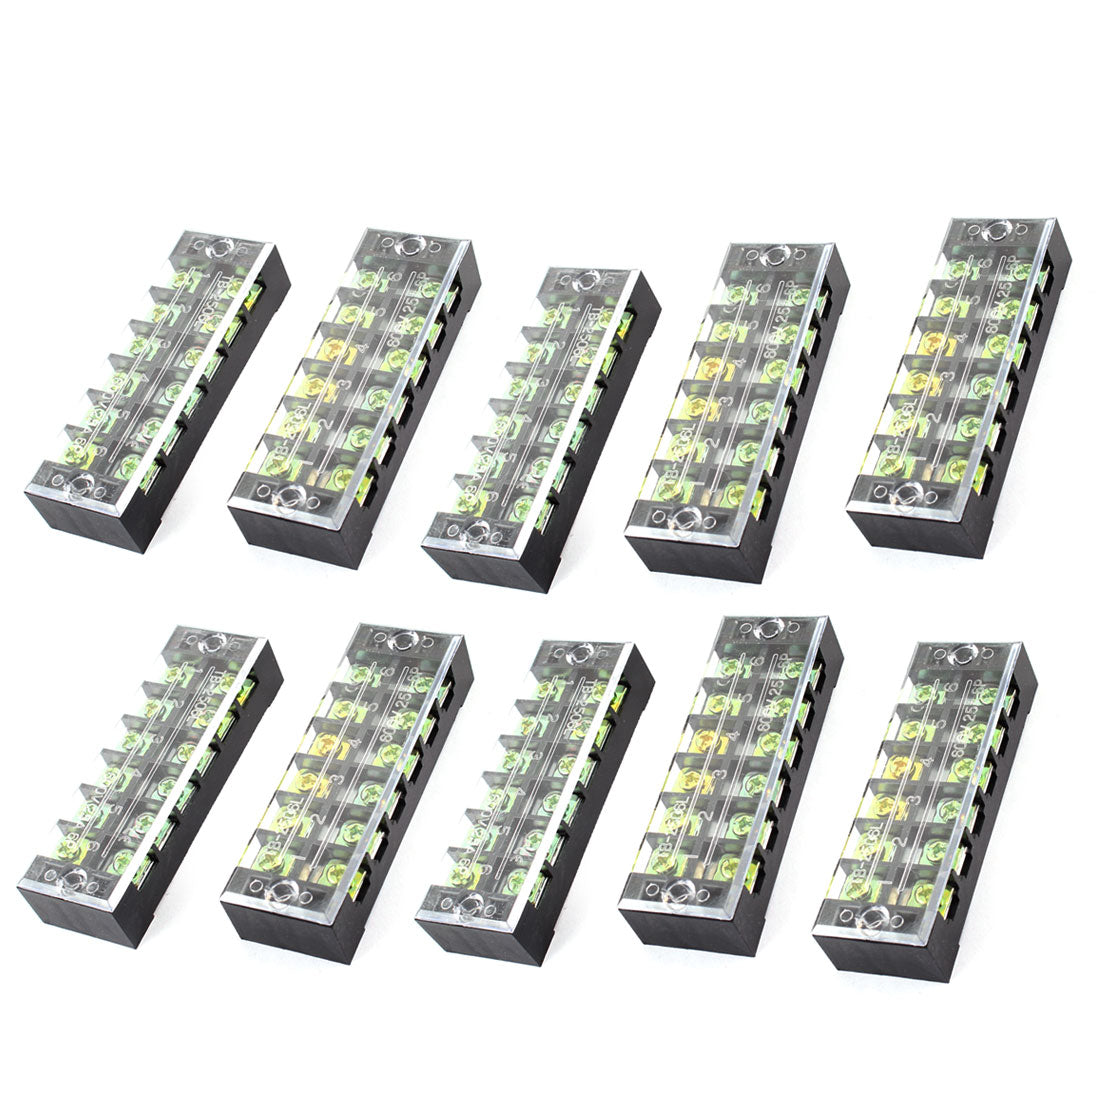 uxcell Uxcell 10 Pcs Dual Row 6 Position Clear Covered Screw Terminal Block Strip Connector Black 600V 25A